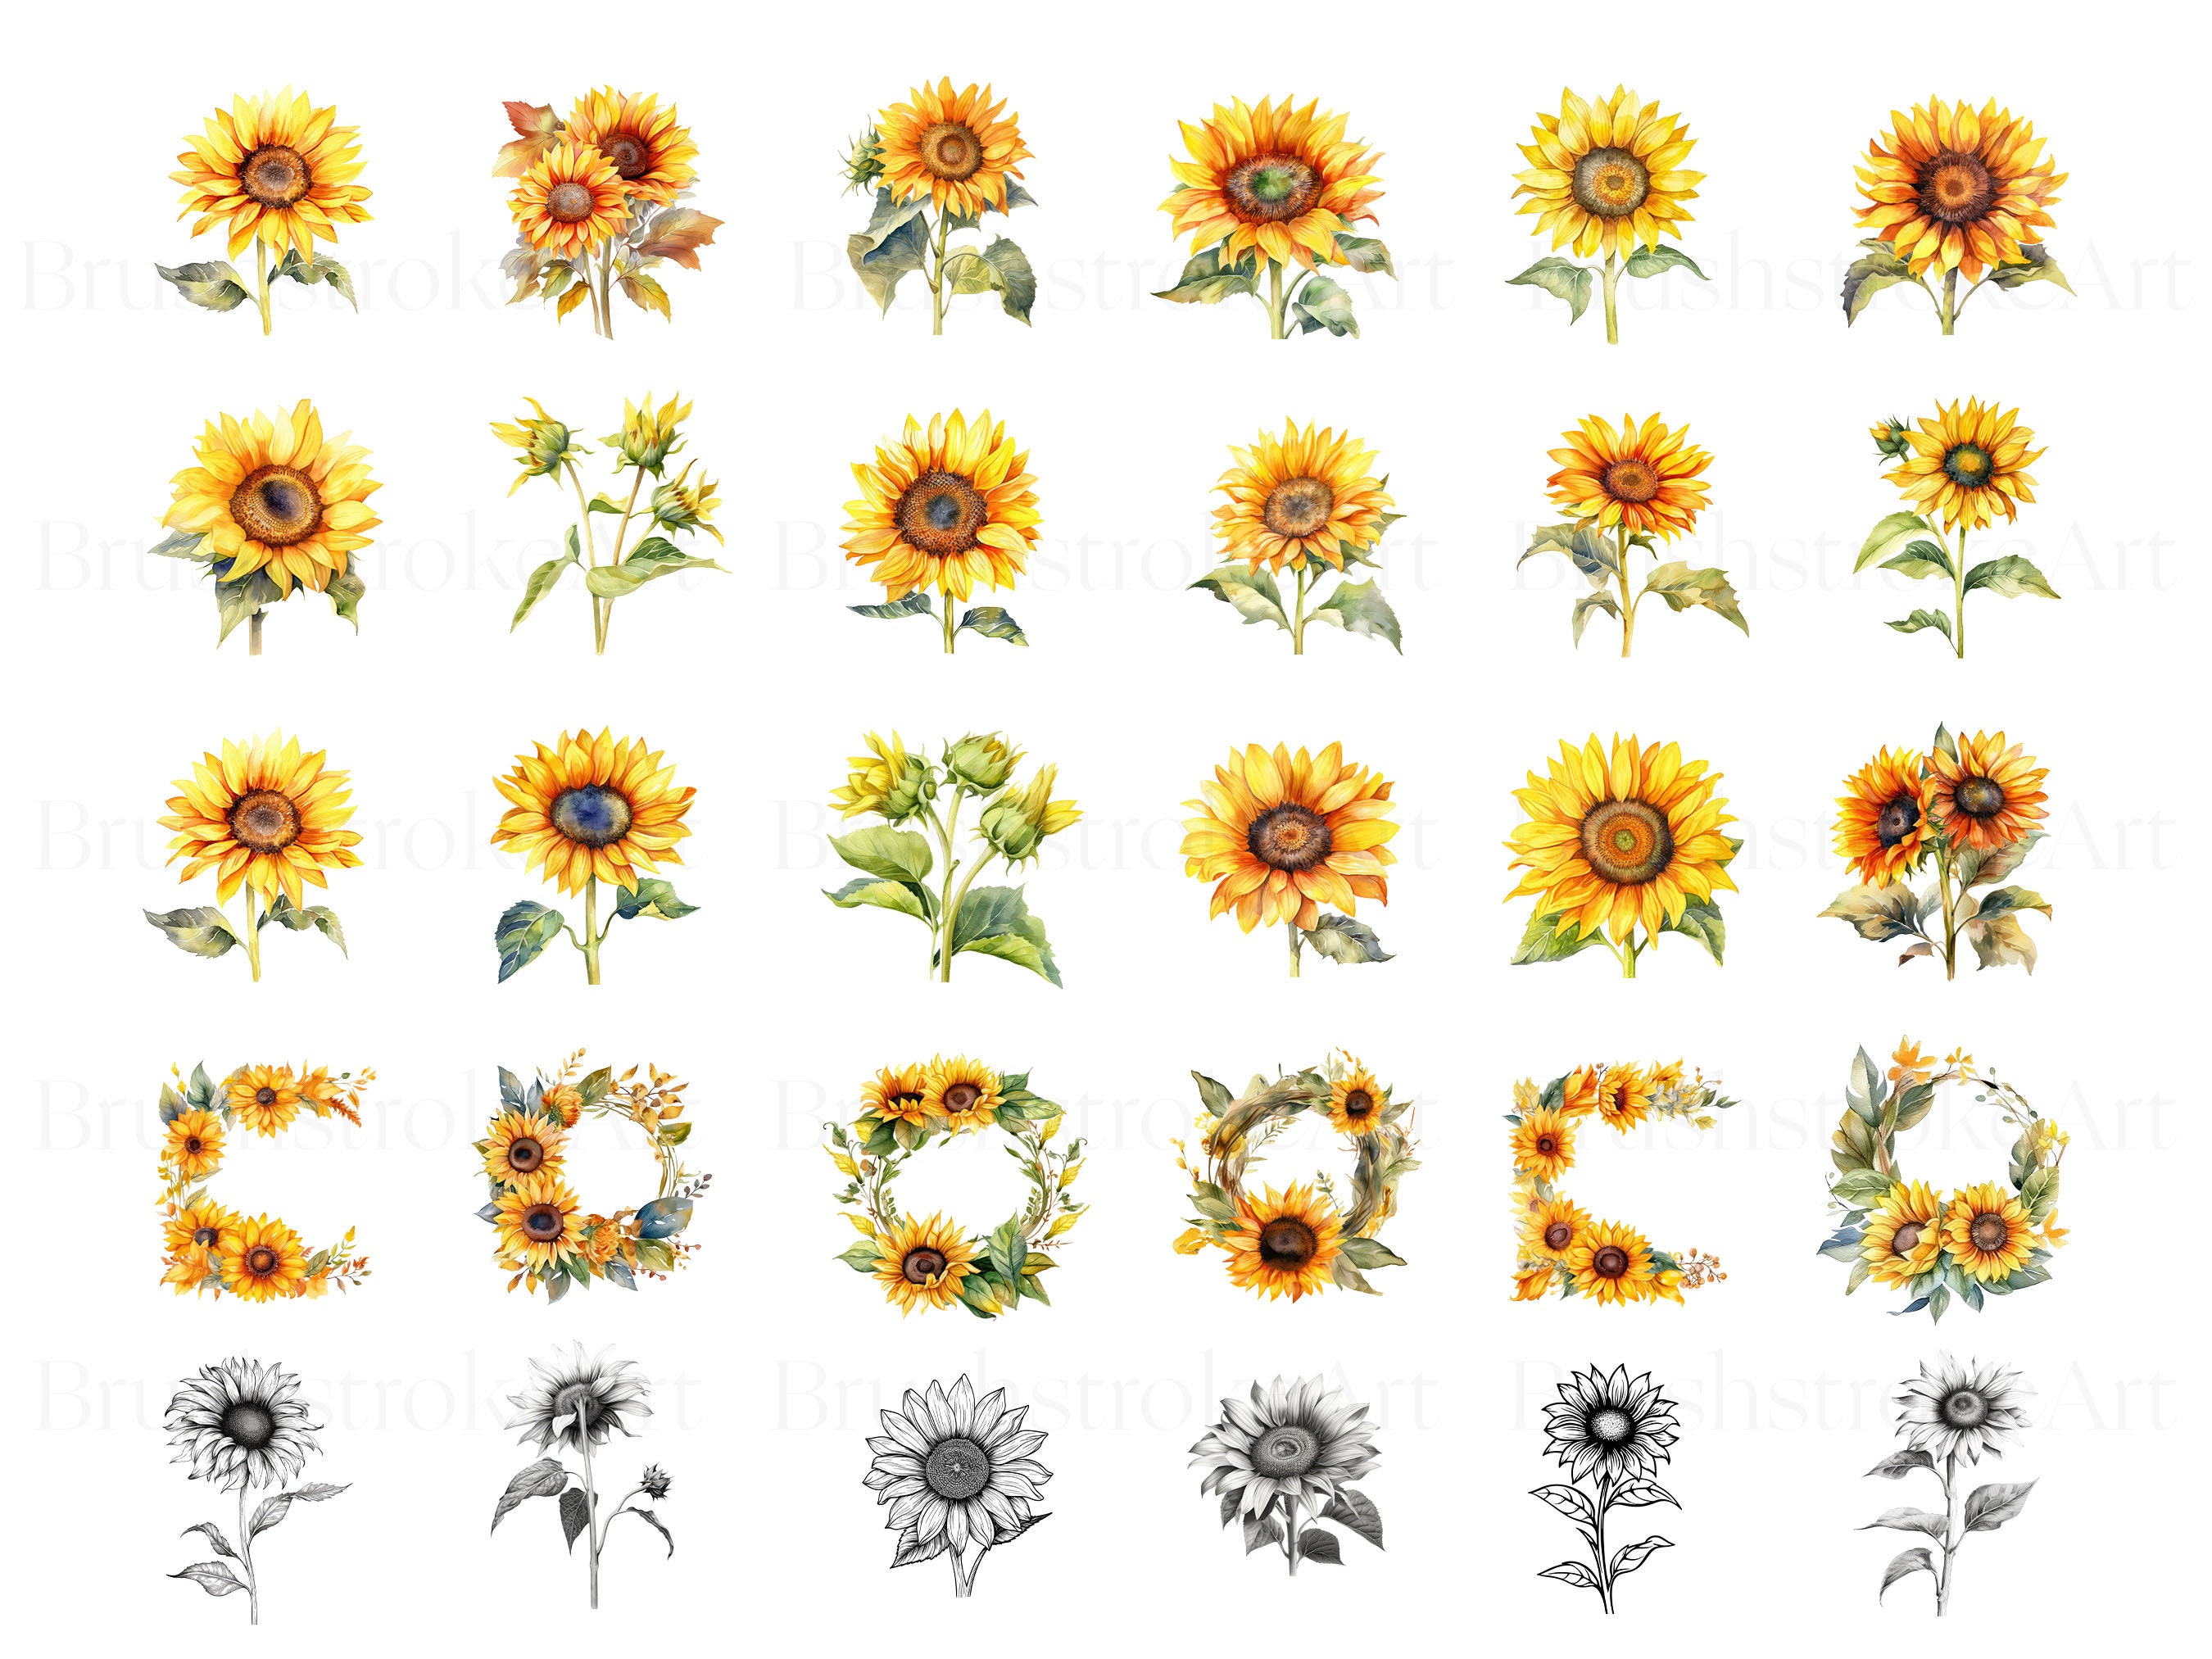 55 Sunflower Watercolour Clipart Pack Collection of - Etsy UK